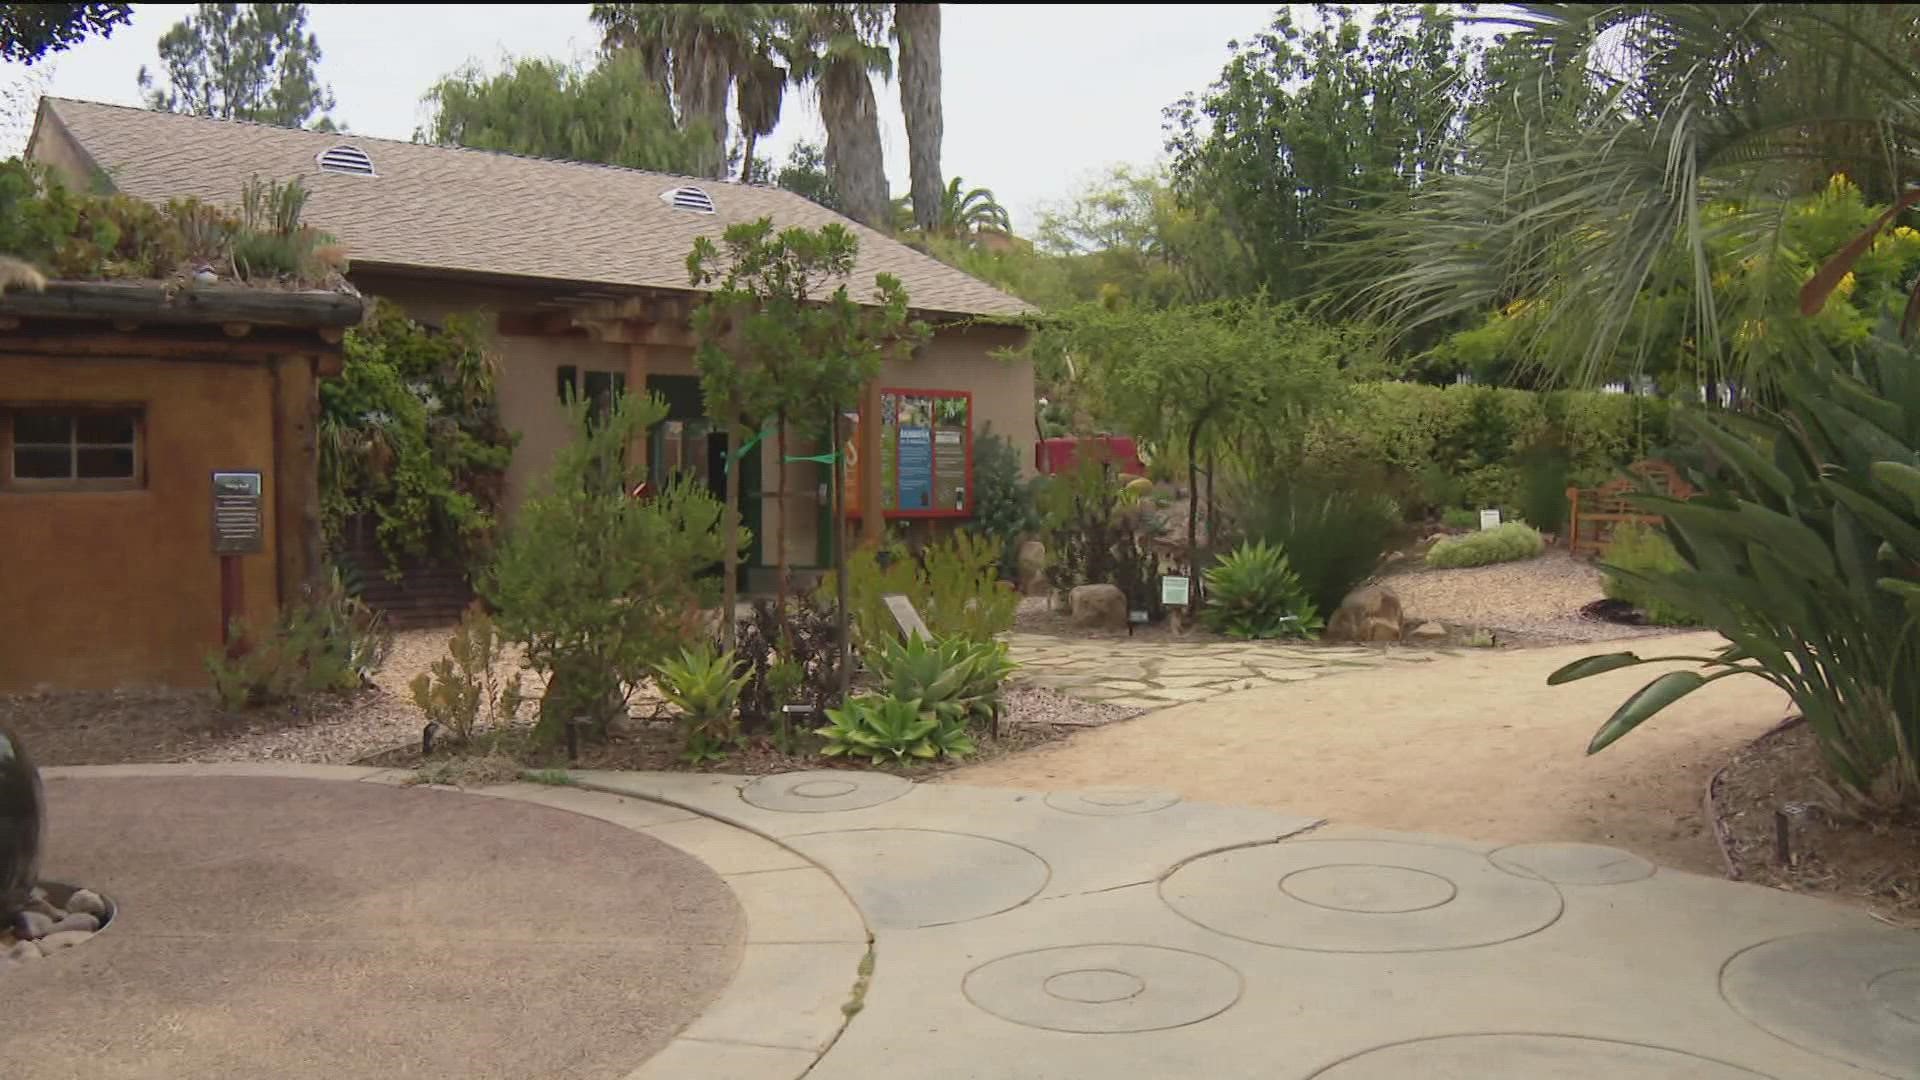 The Water Conservation Garden is a great place to get inspired and learn tips through classes.